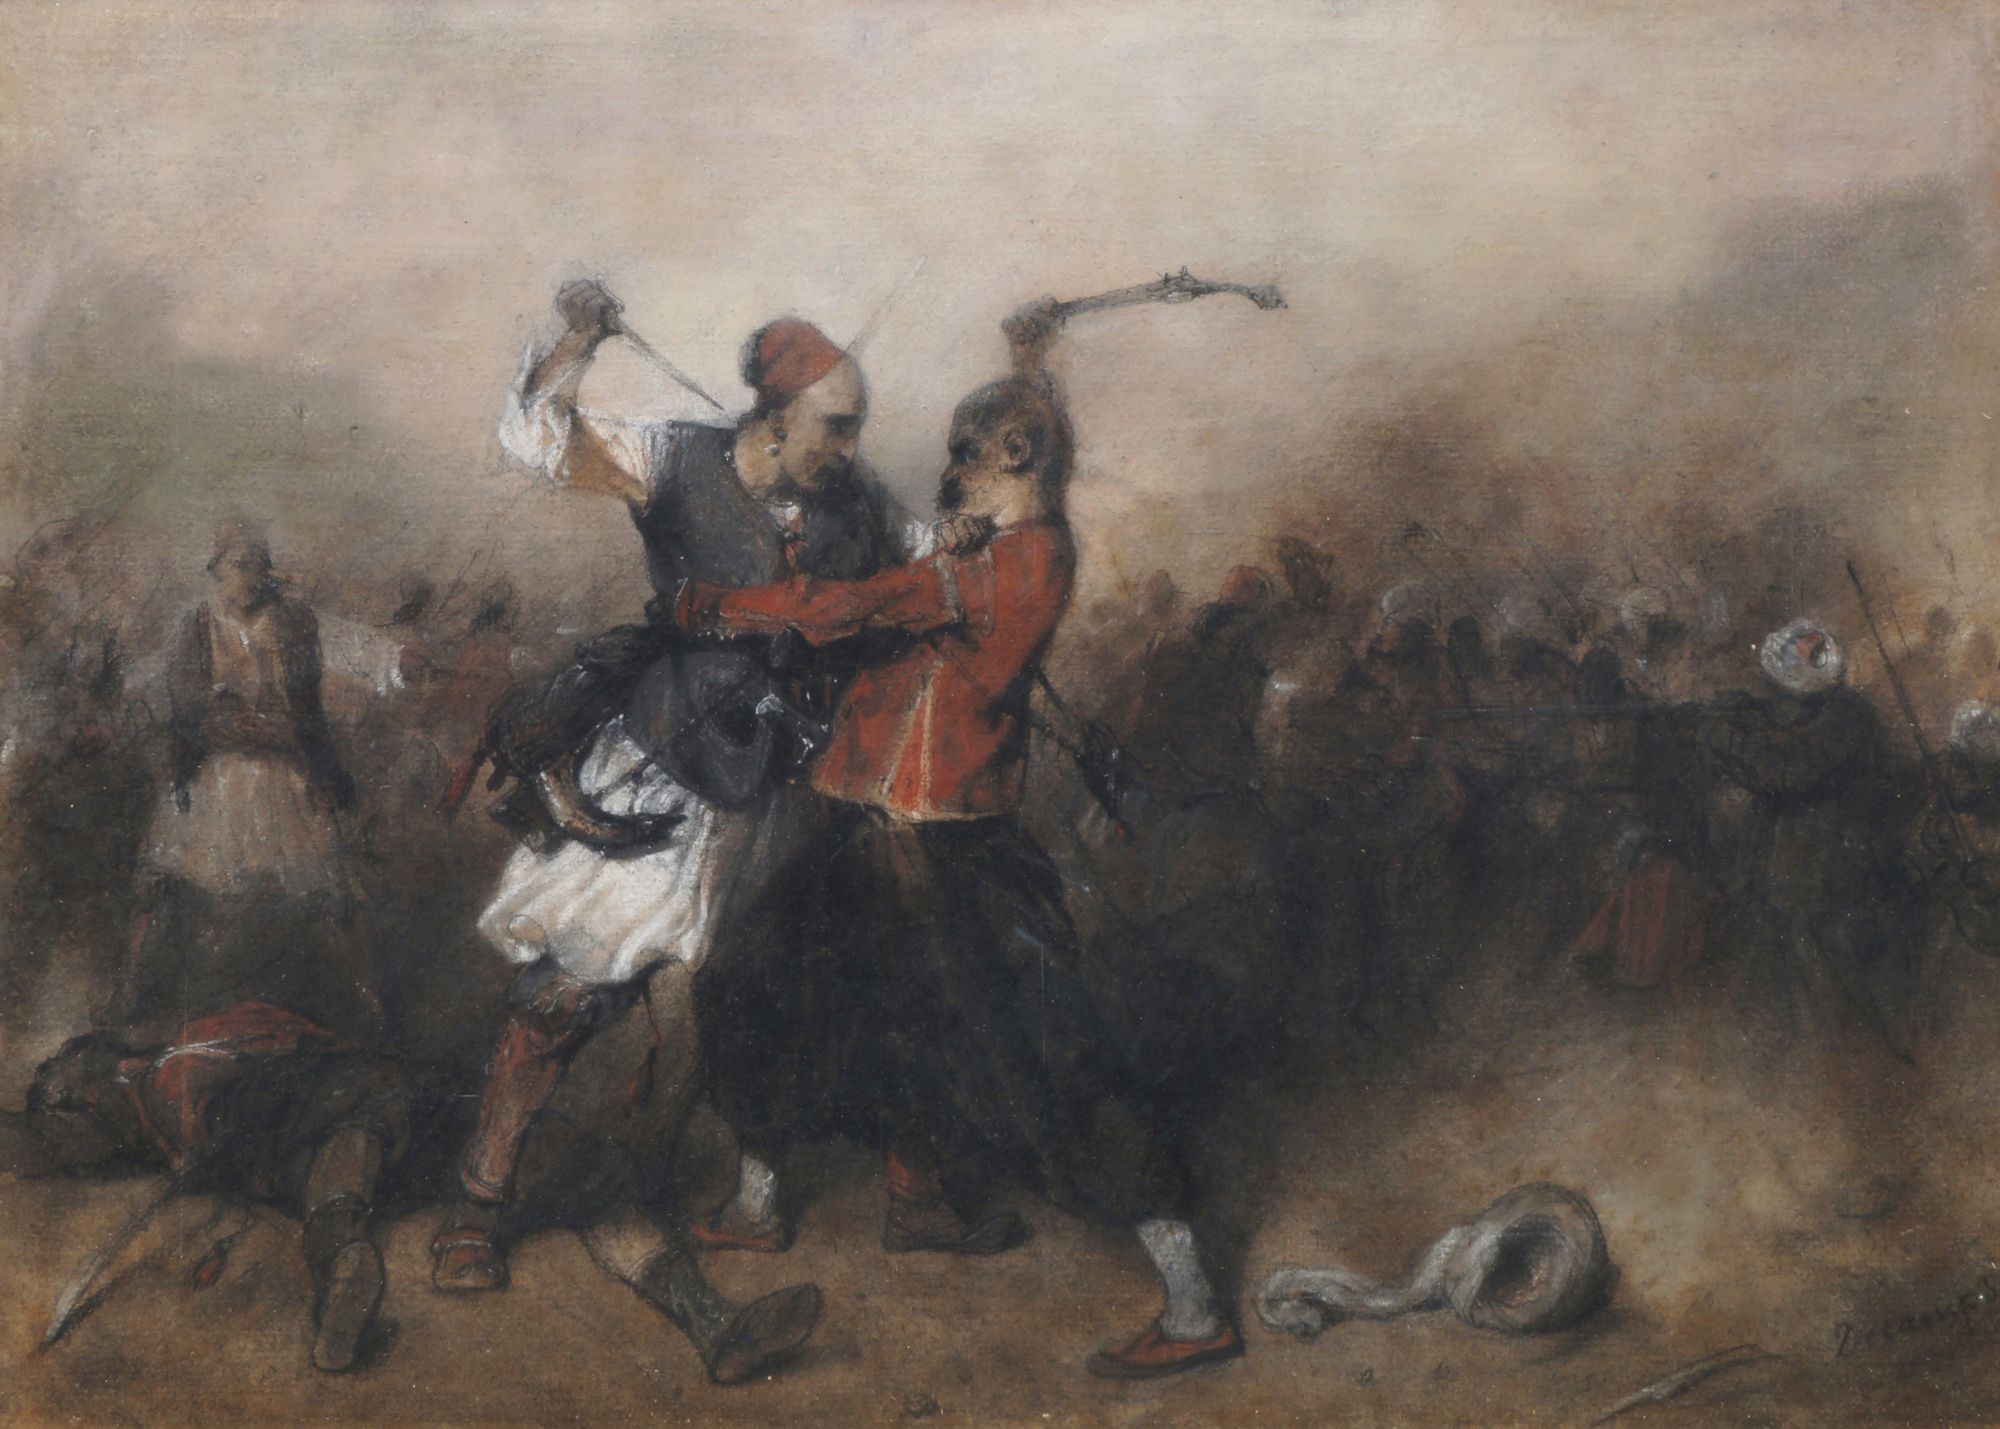 Alexandre Gabriel Decamps, French 1803-1860- Battle between a greek and a turk; pastel on paper,